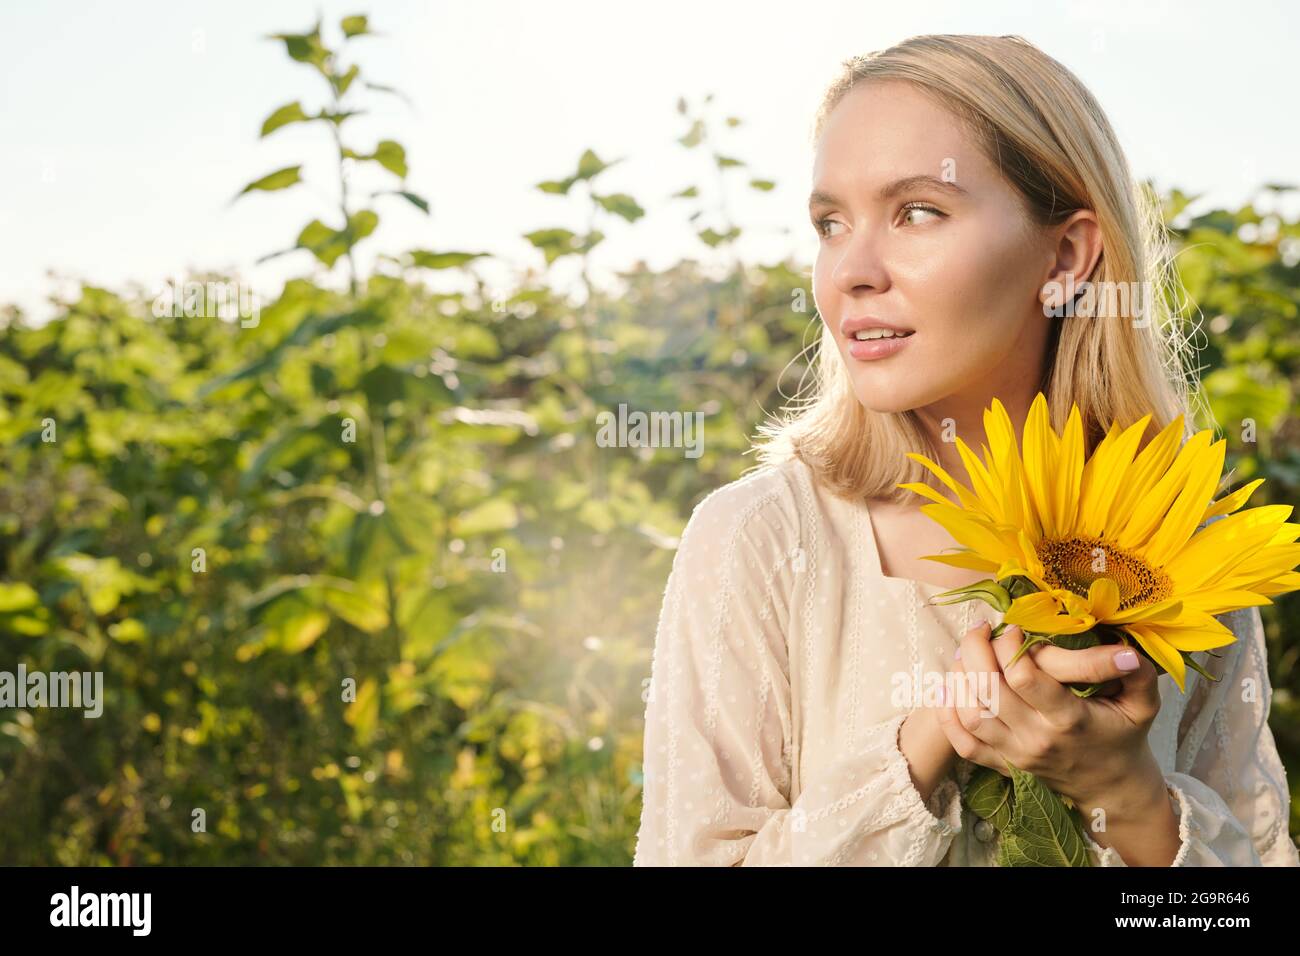 Joyful young blond woman in sunglasses and white dress standing against sunflower field in front of camera with blue sky on background Stock Photo